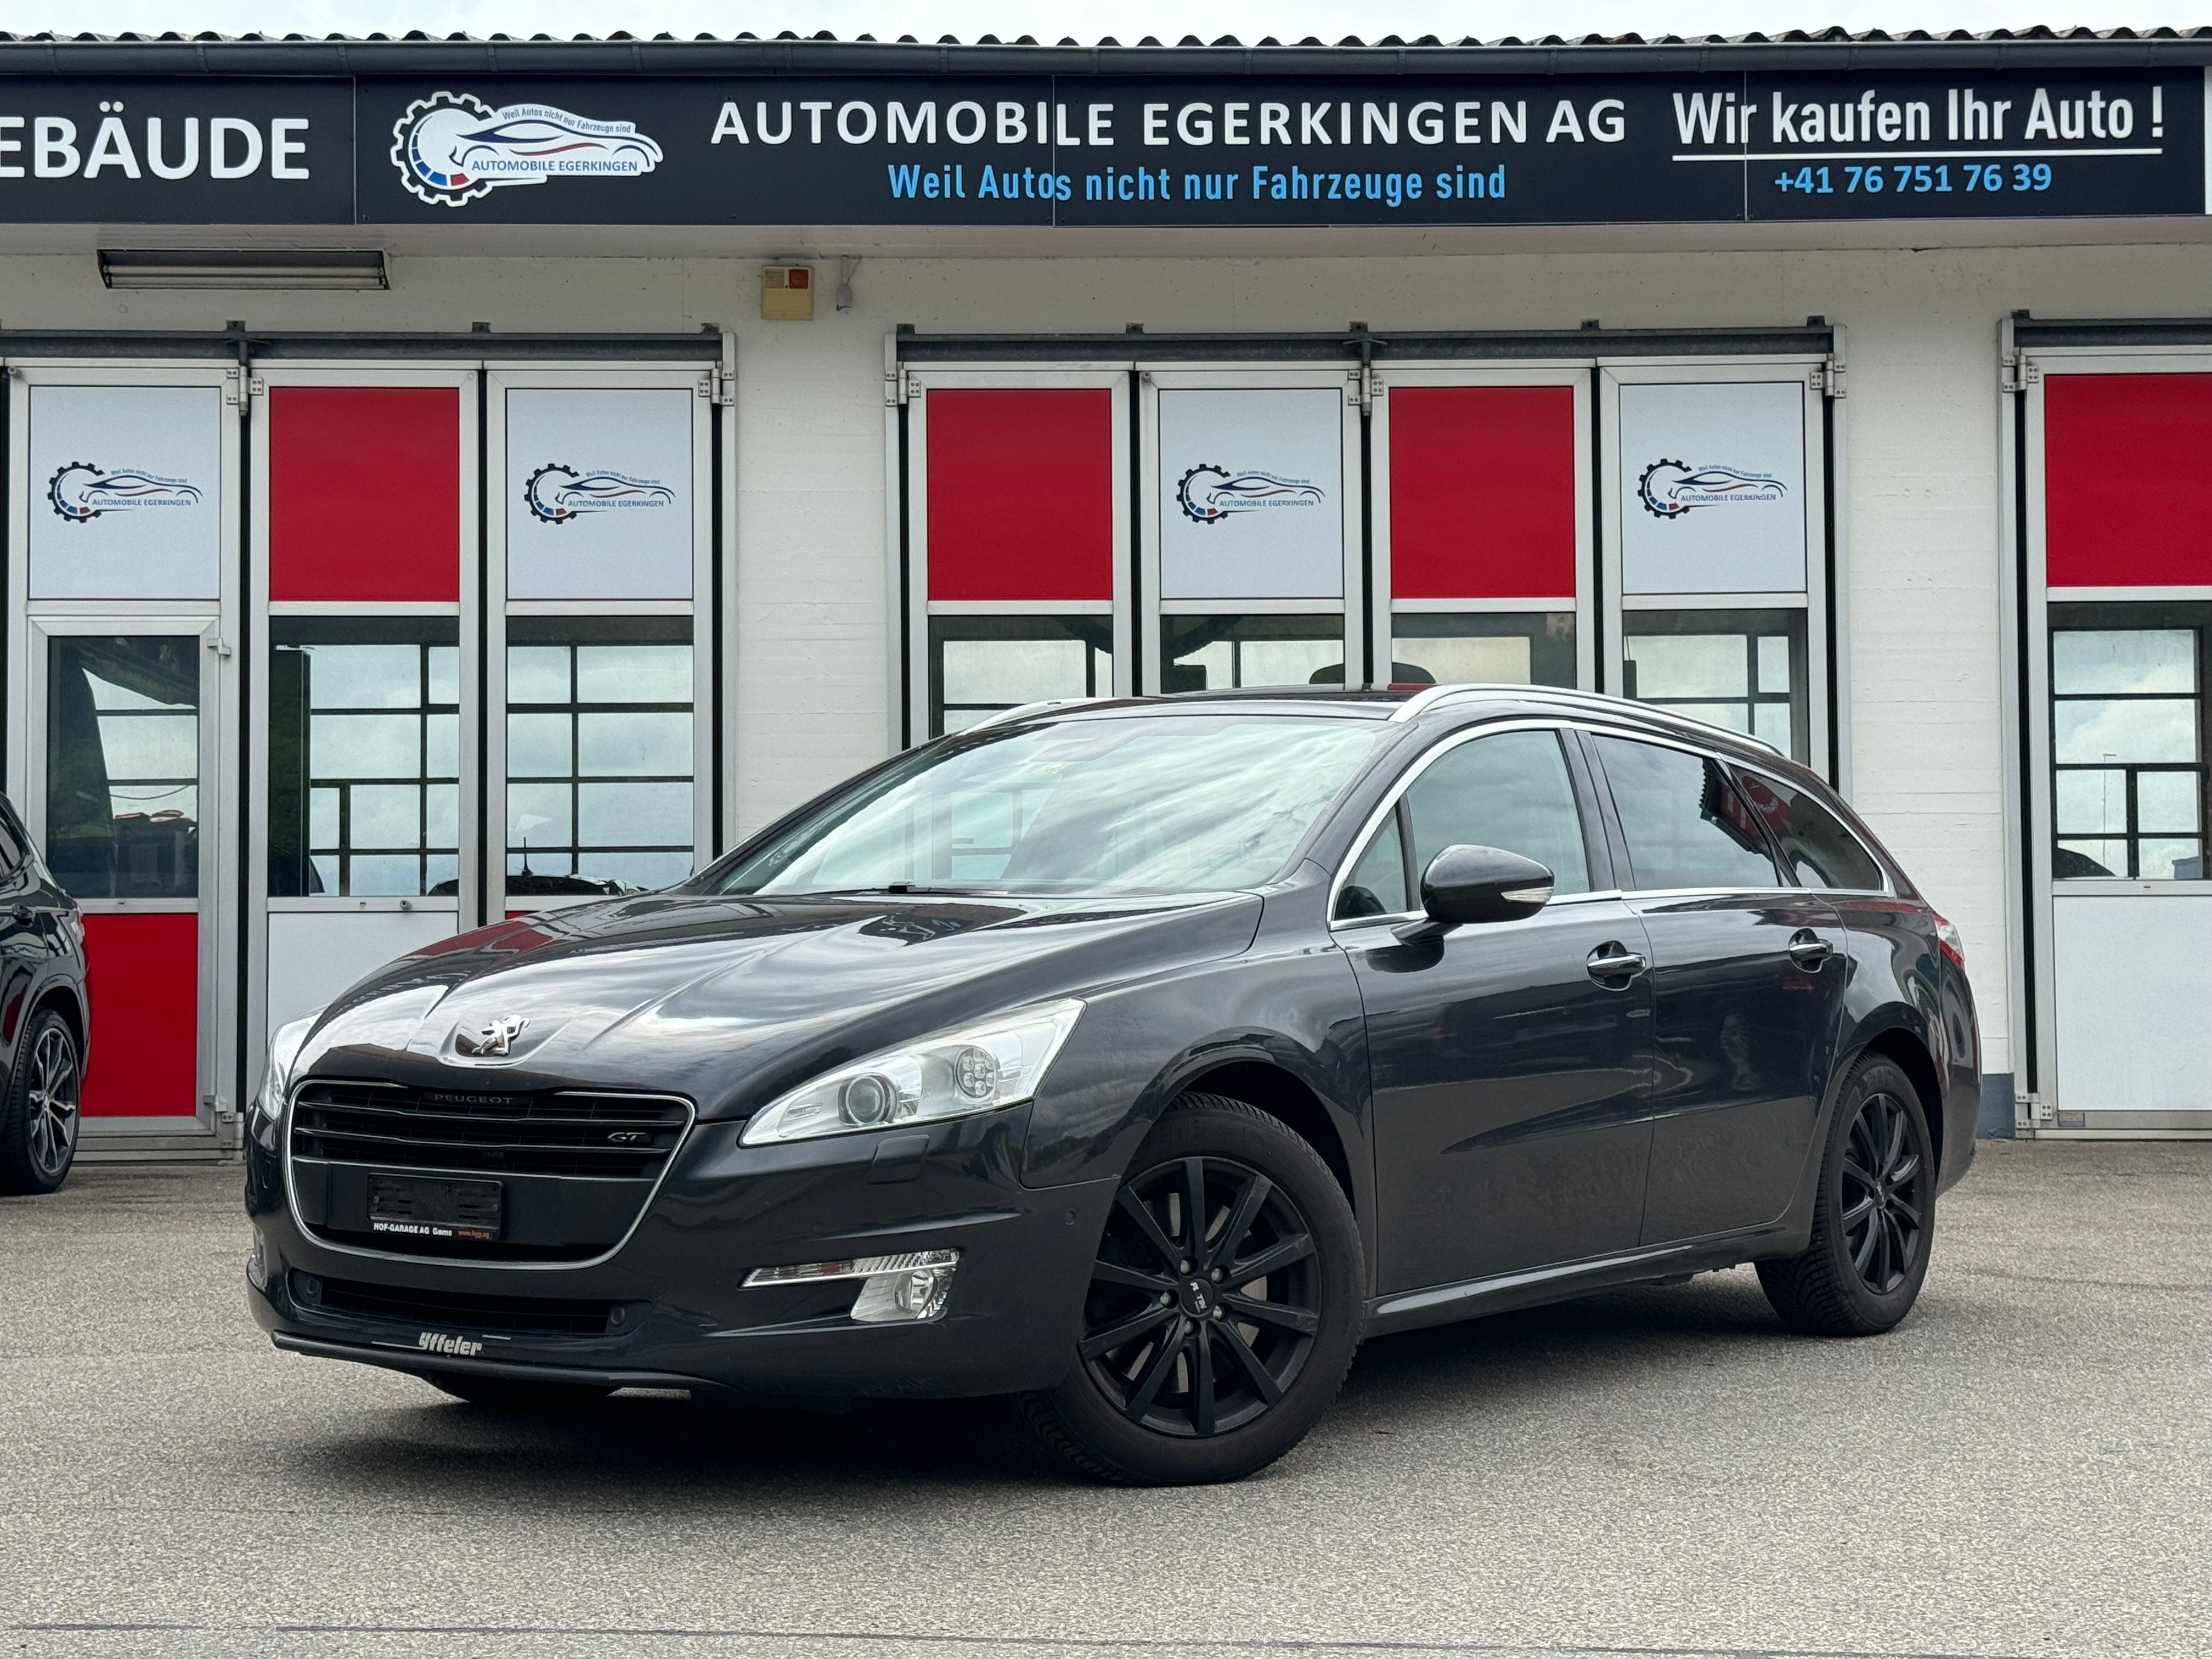 PEUGEOT 508 SW 2.2 HDI GT Automatic